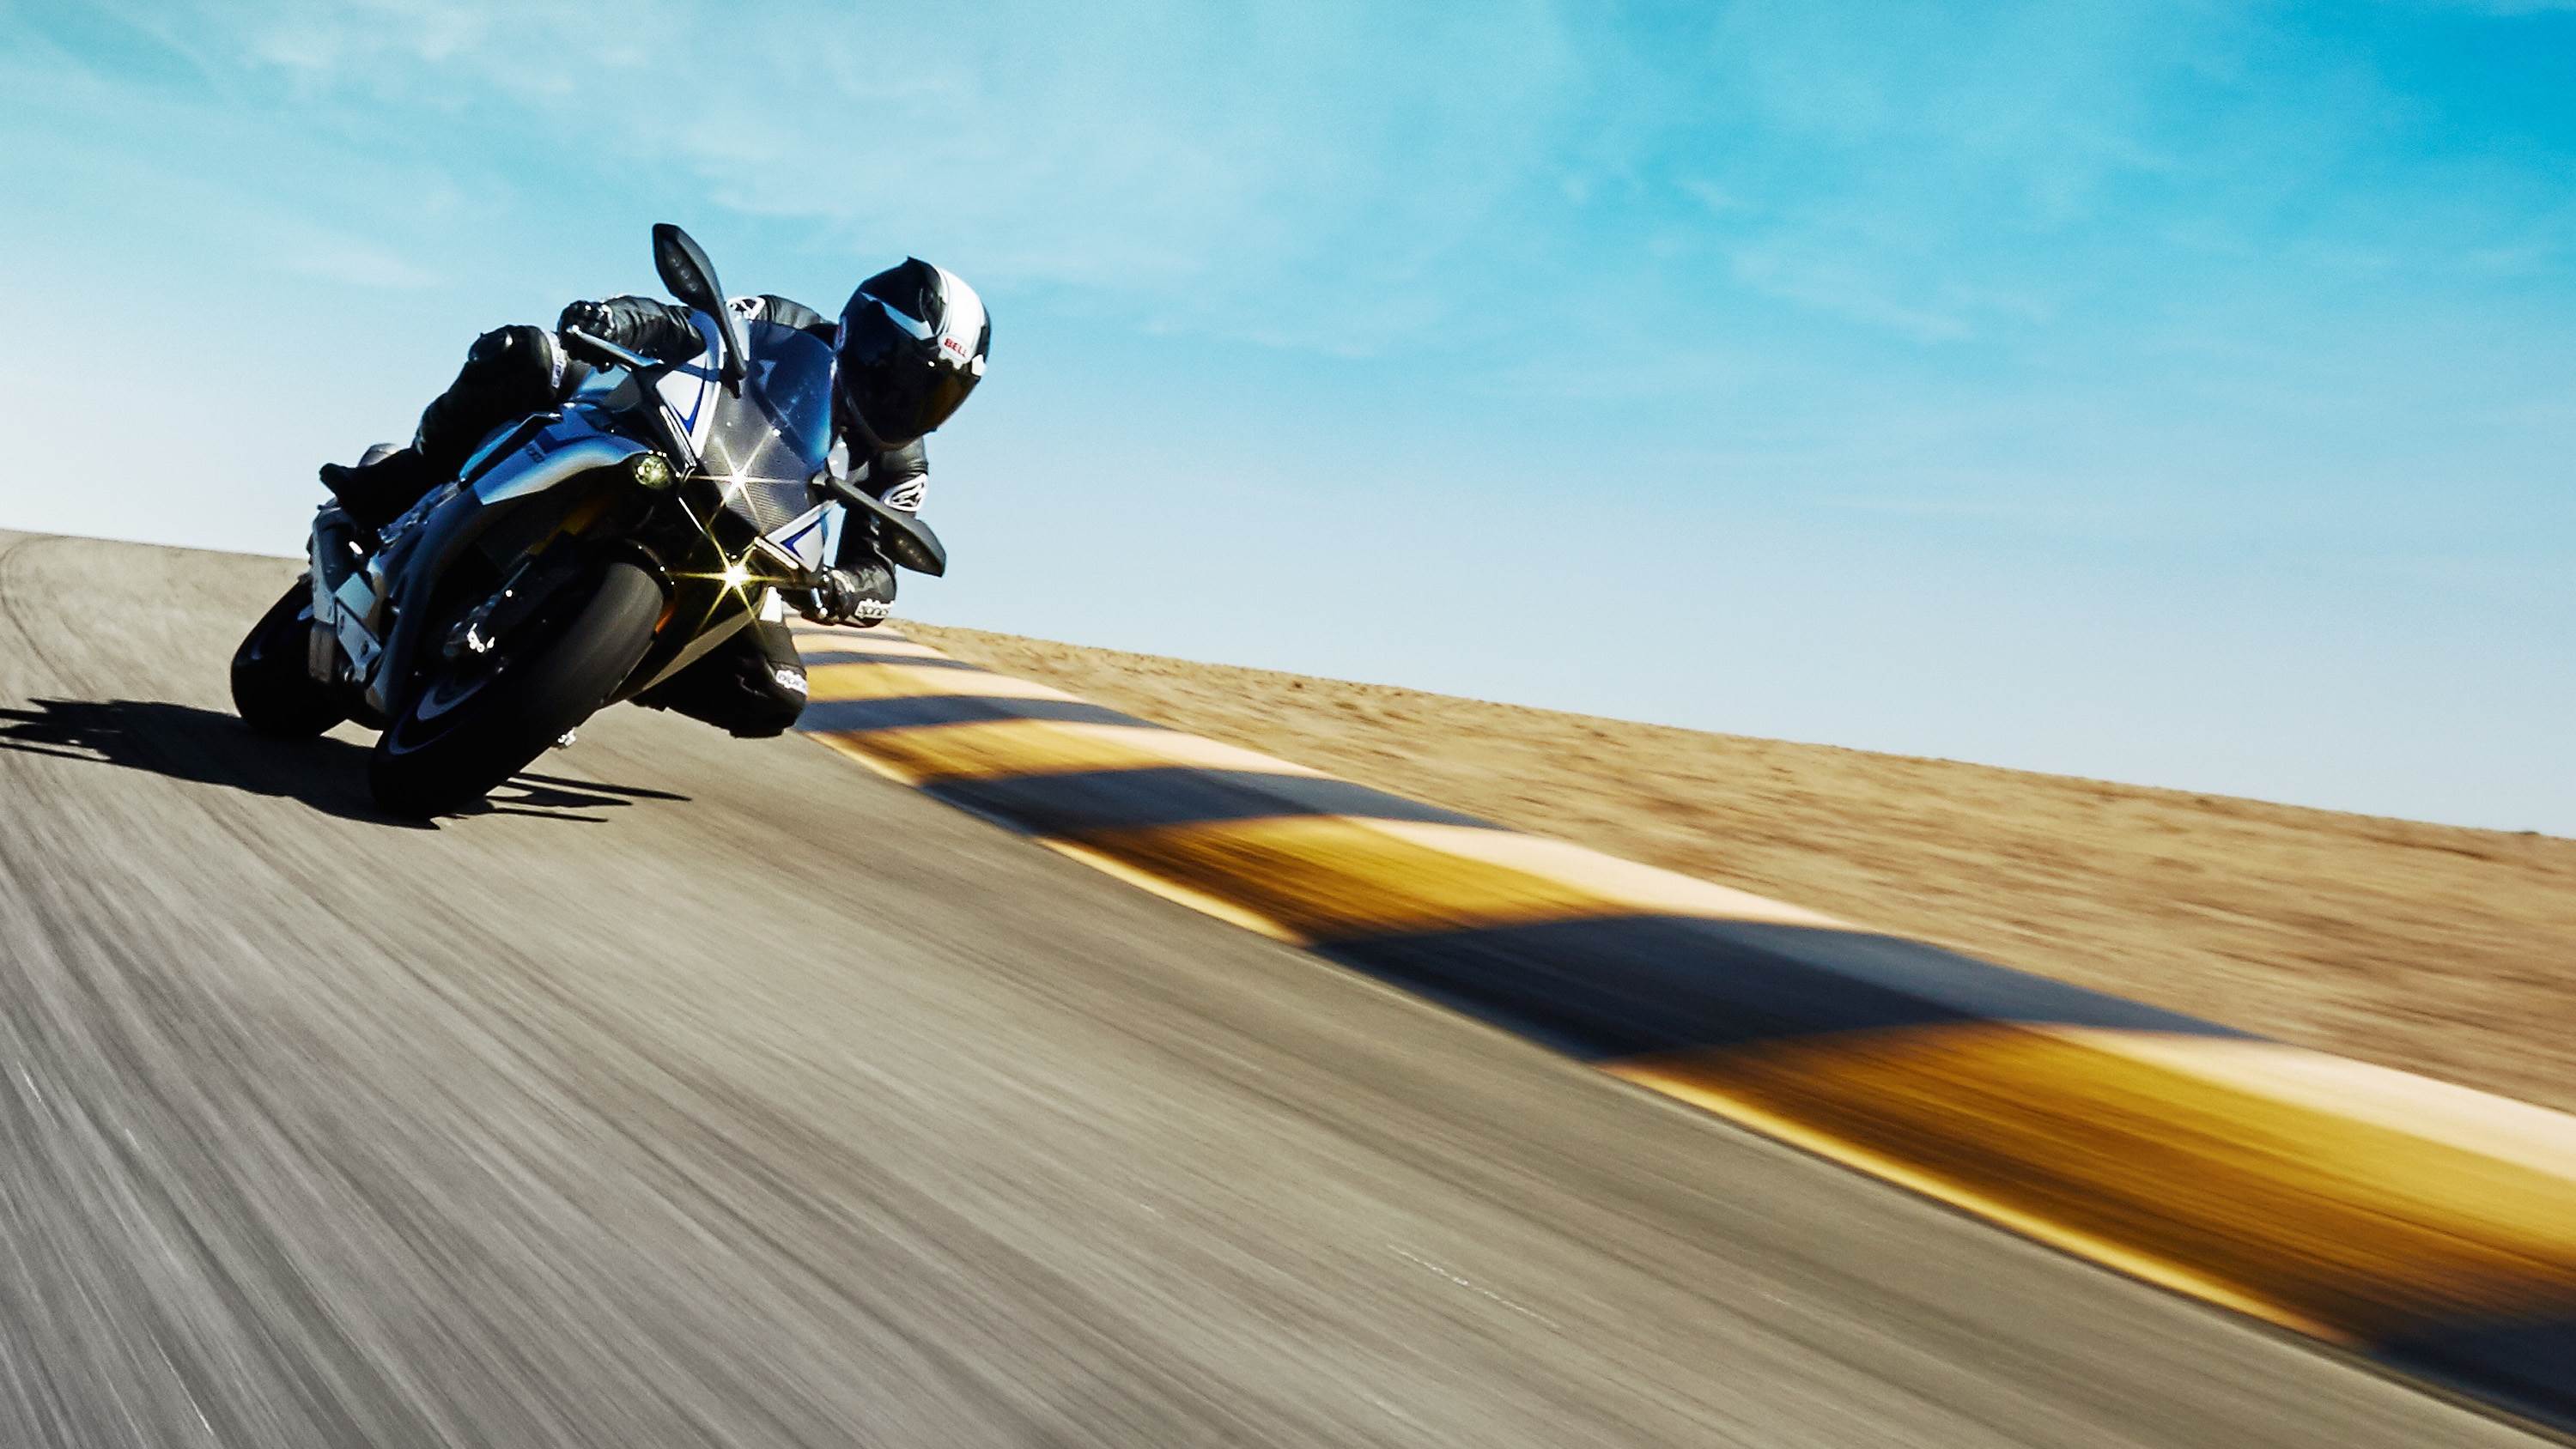 The Post Yamaha R1 M HD Wallpaper Appeared First On